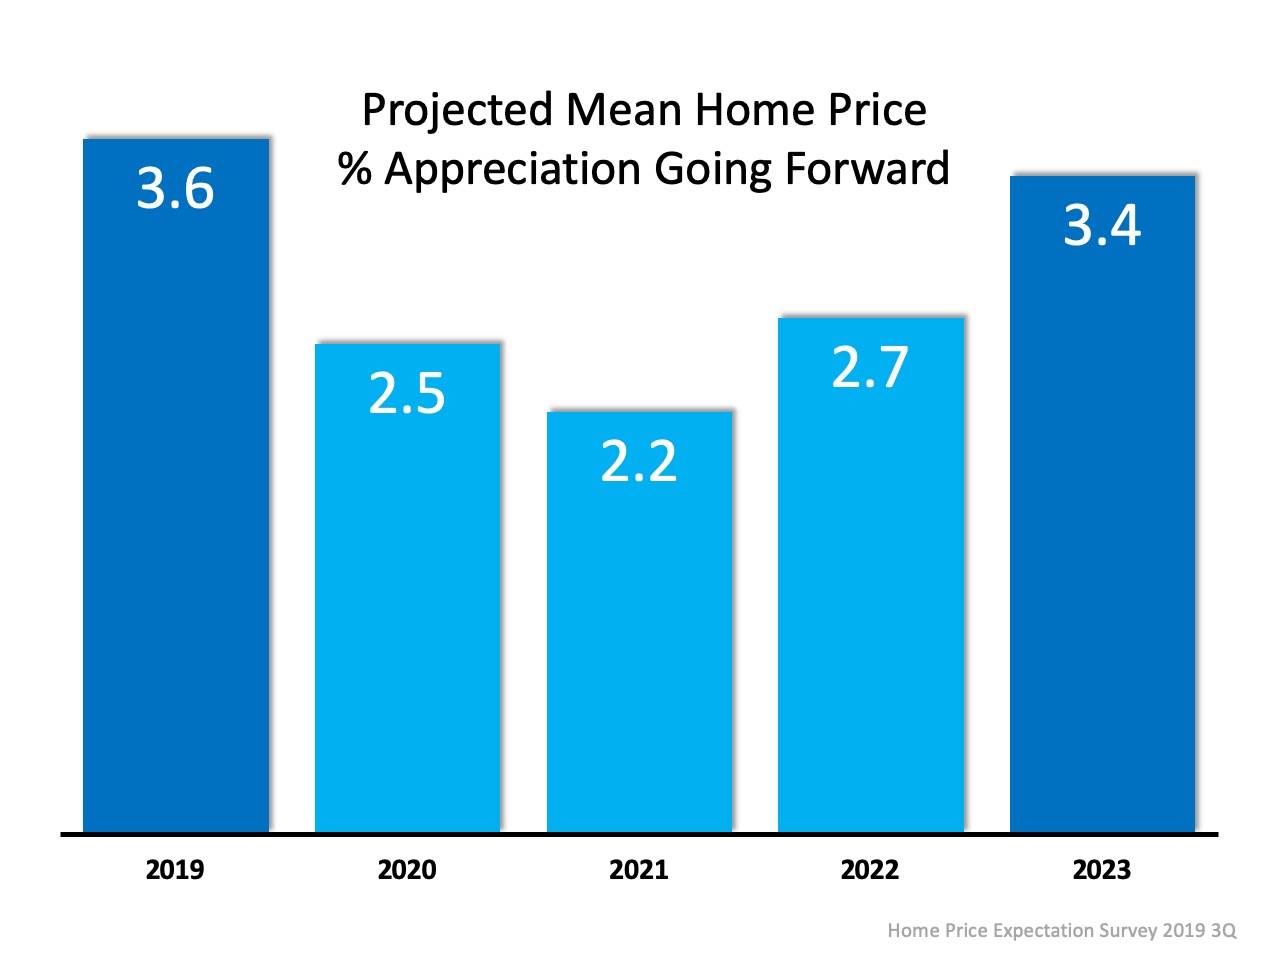 Projected Home Price Appreciation Going Forward